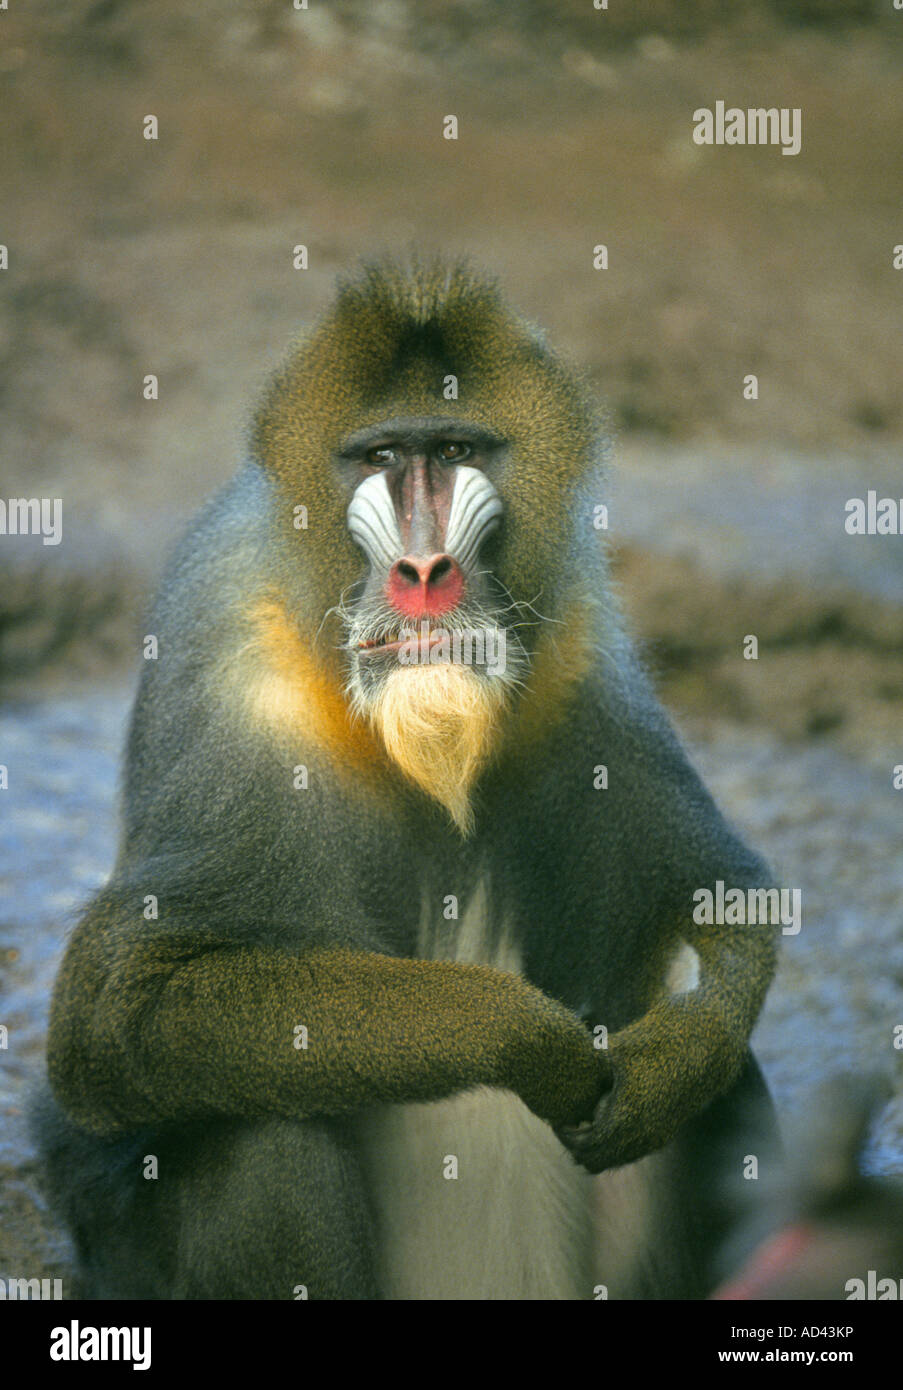 The Mandrill Mandrillus sphinx is a primate of the Cercopithecidae Old world monkeys family closely related to the baboons Stock Photo